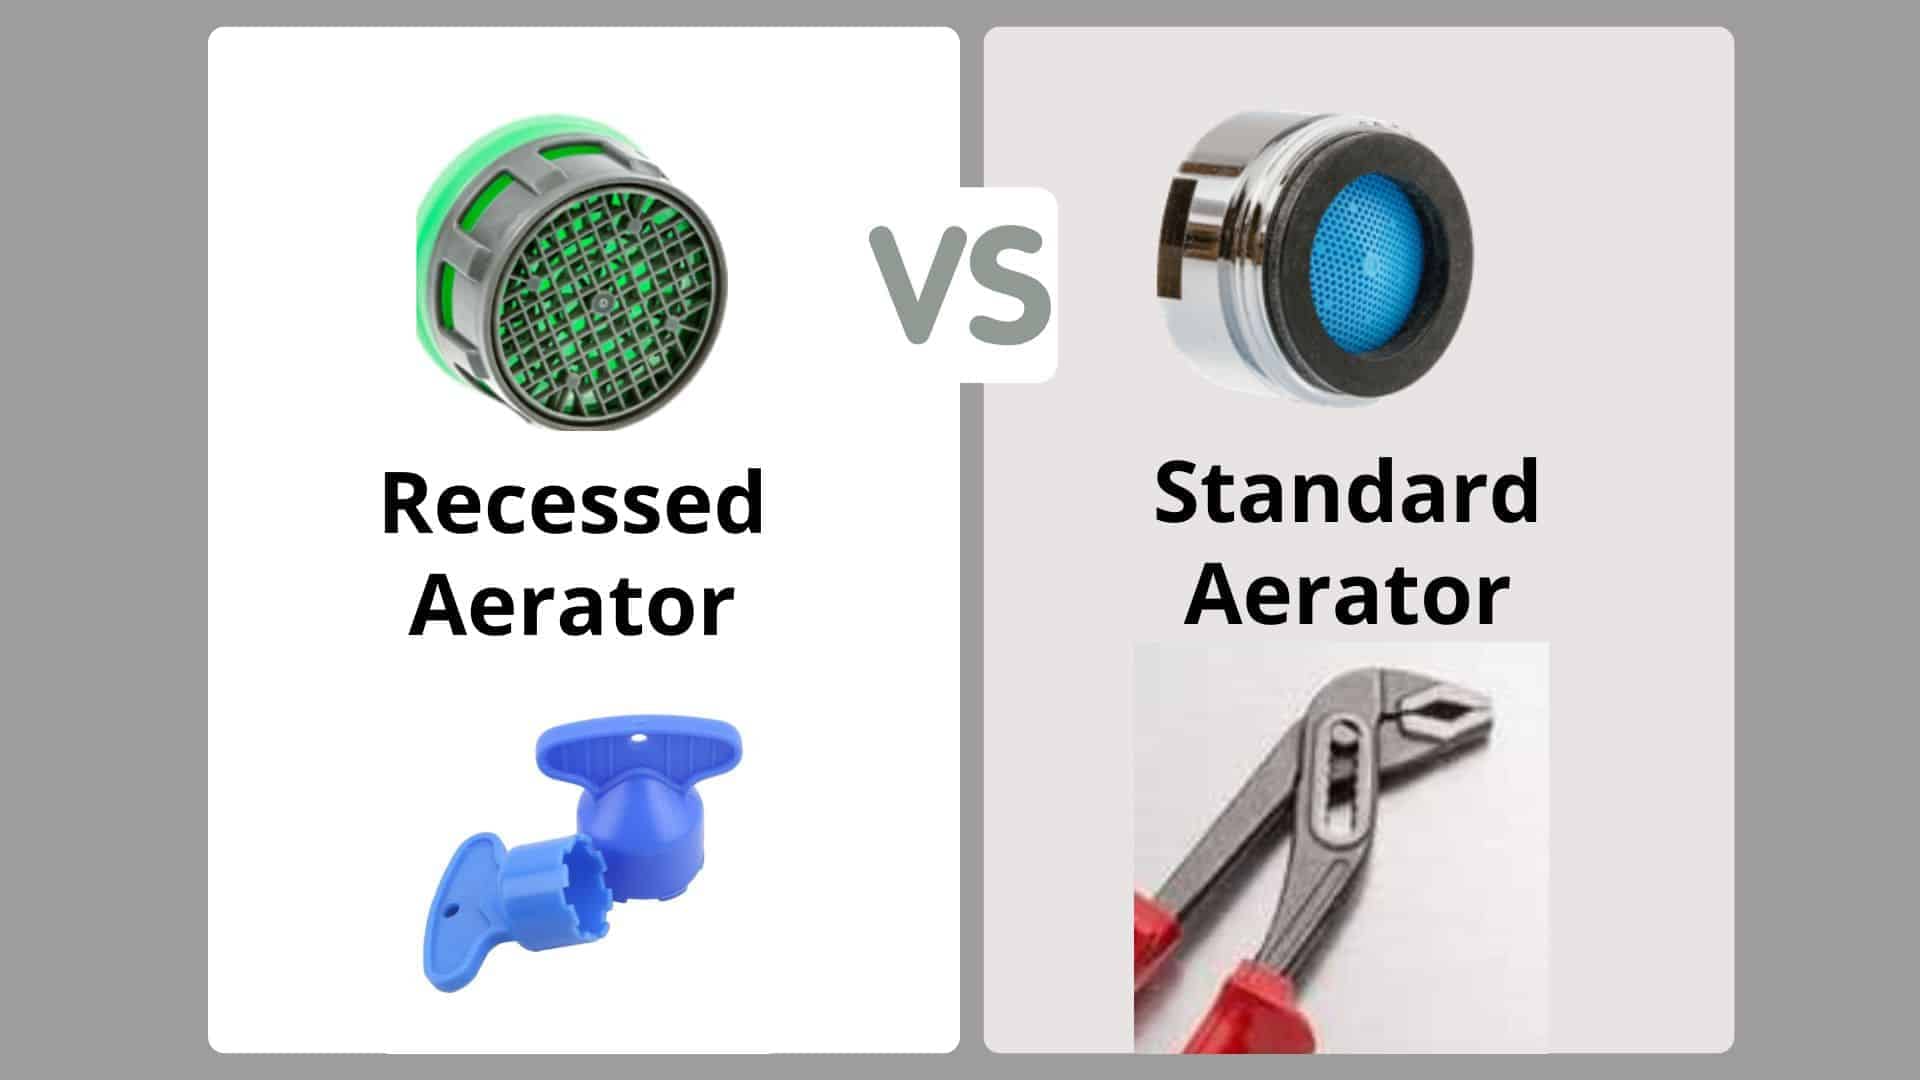 Faucet aerator- How to remove recessed vs standard aerator